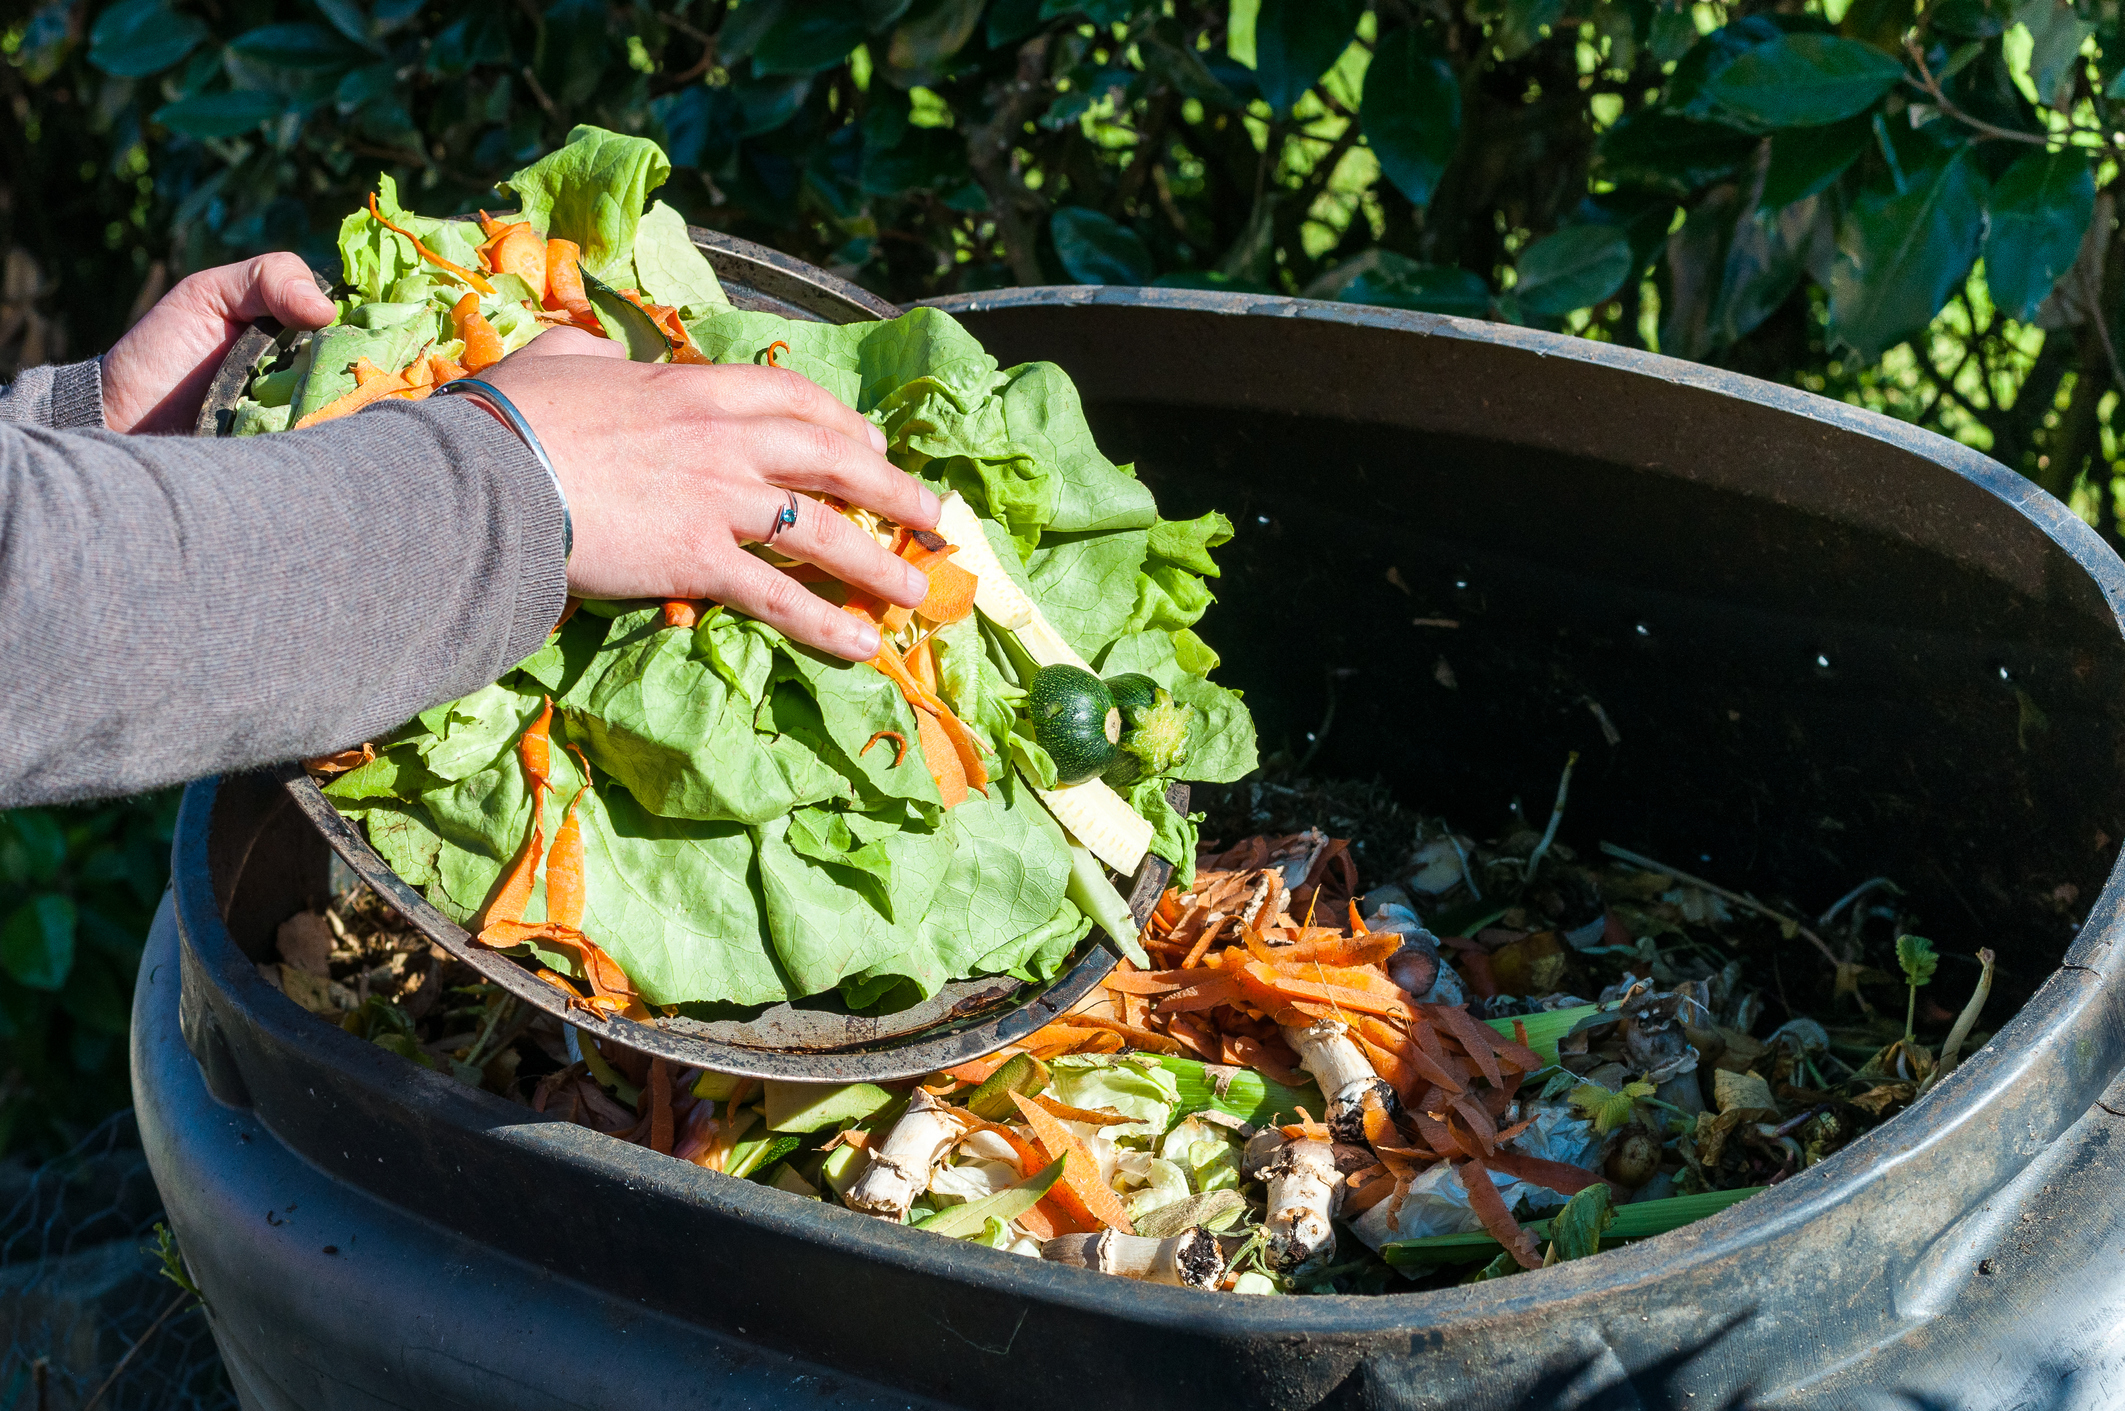 Worst food waste items to compost | KS Environmental